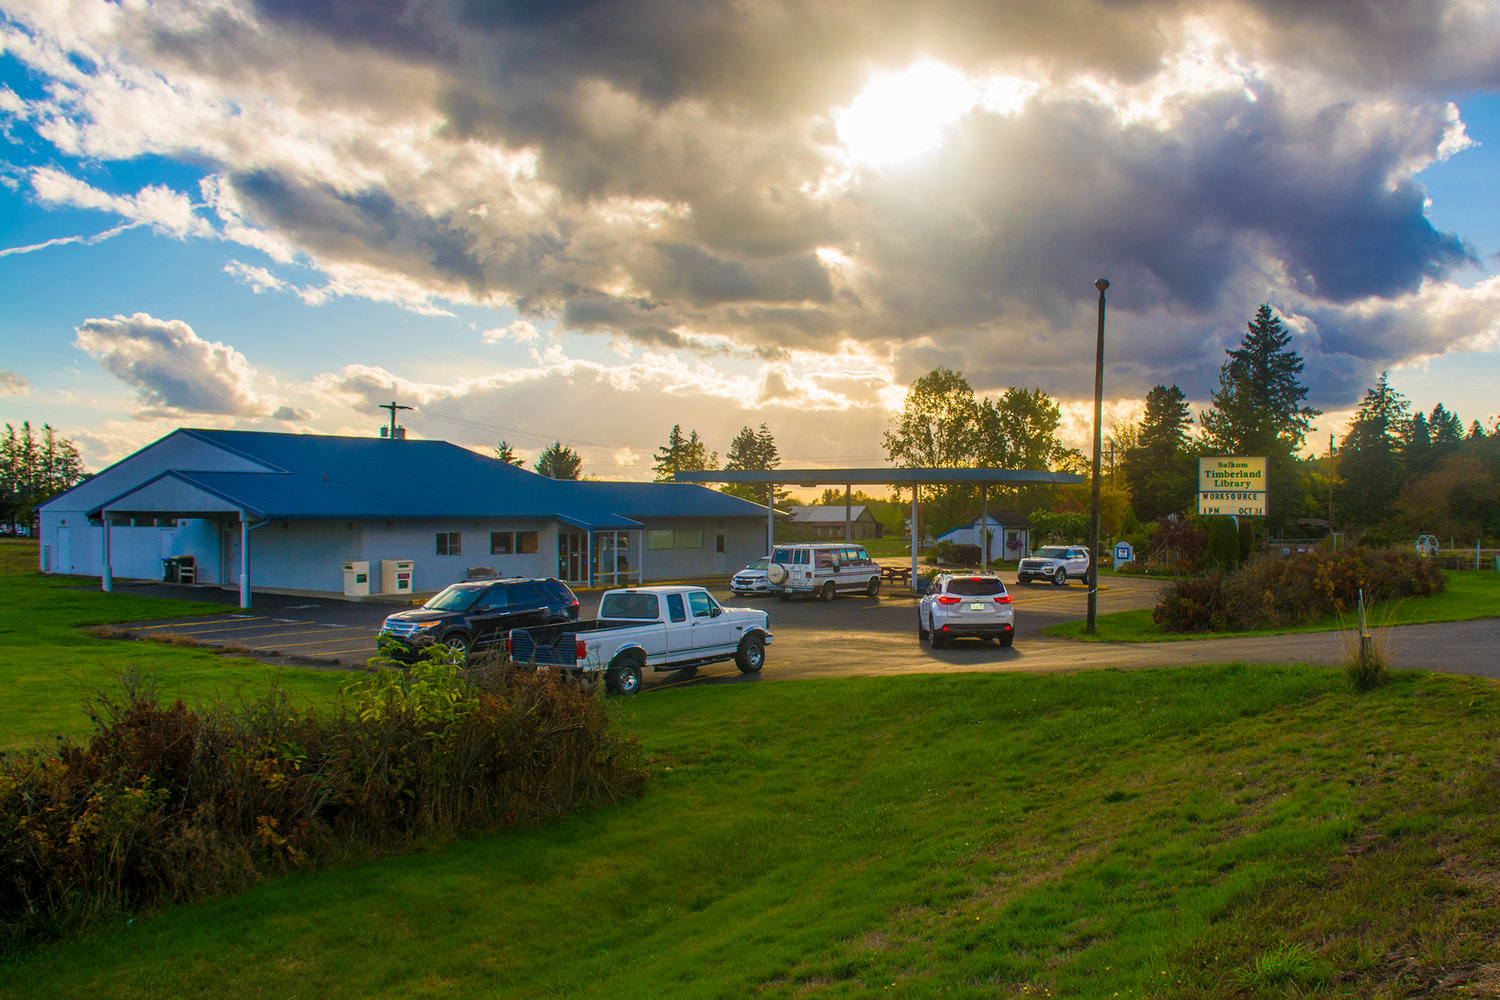 Cars sit in the parking lot of the Salkum Timberland Library, which has already closed for the day, connecting to one of the few WiFi Internet connections available in rural East Lewis County in this May 2019 Chronicle file photo. 